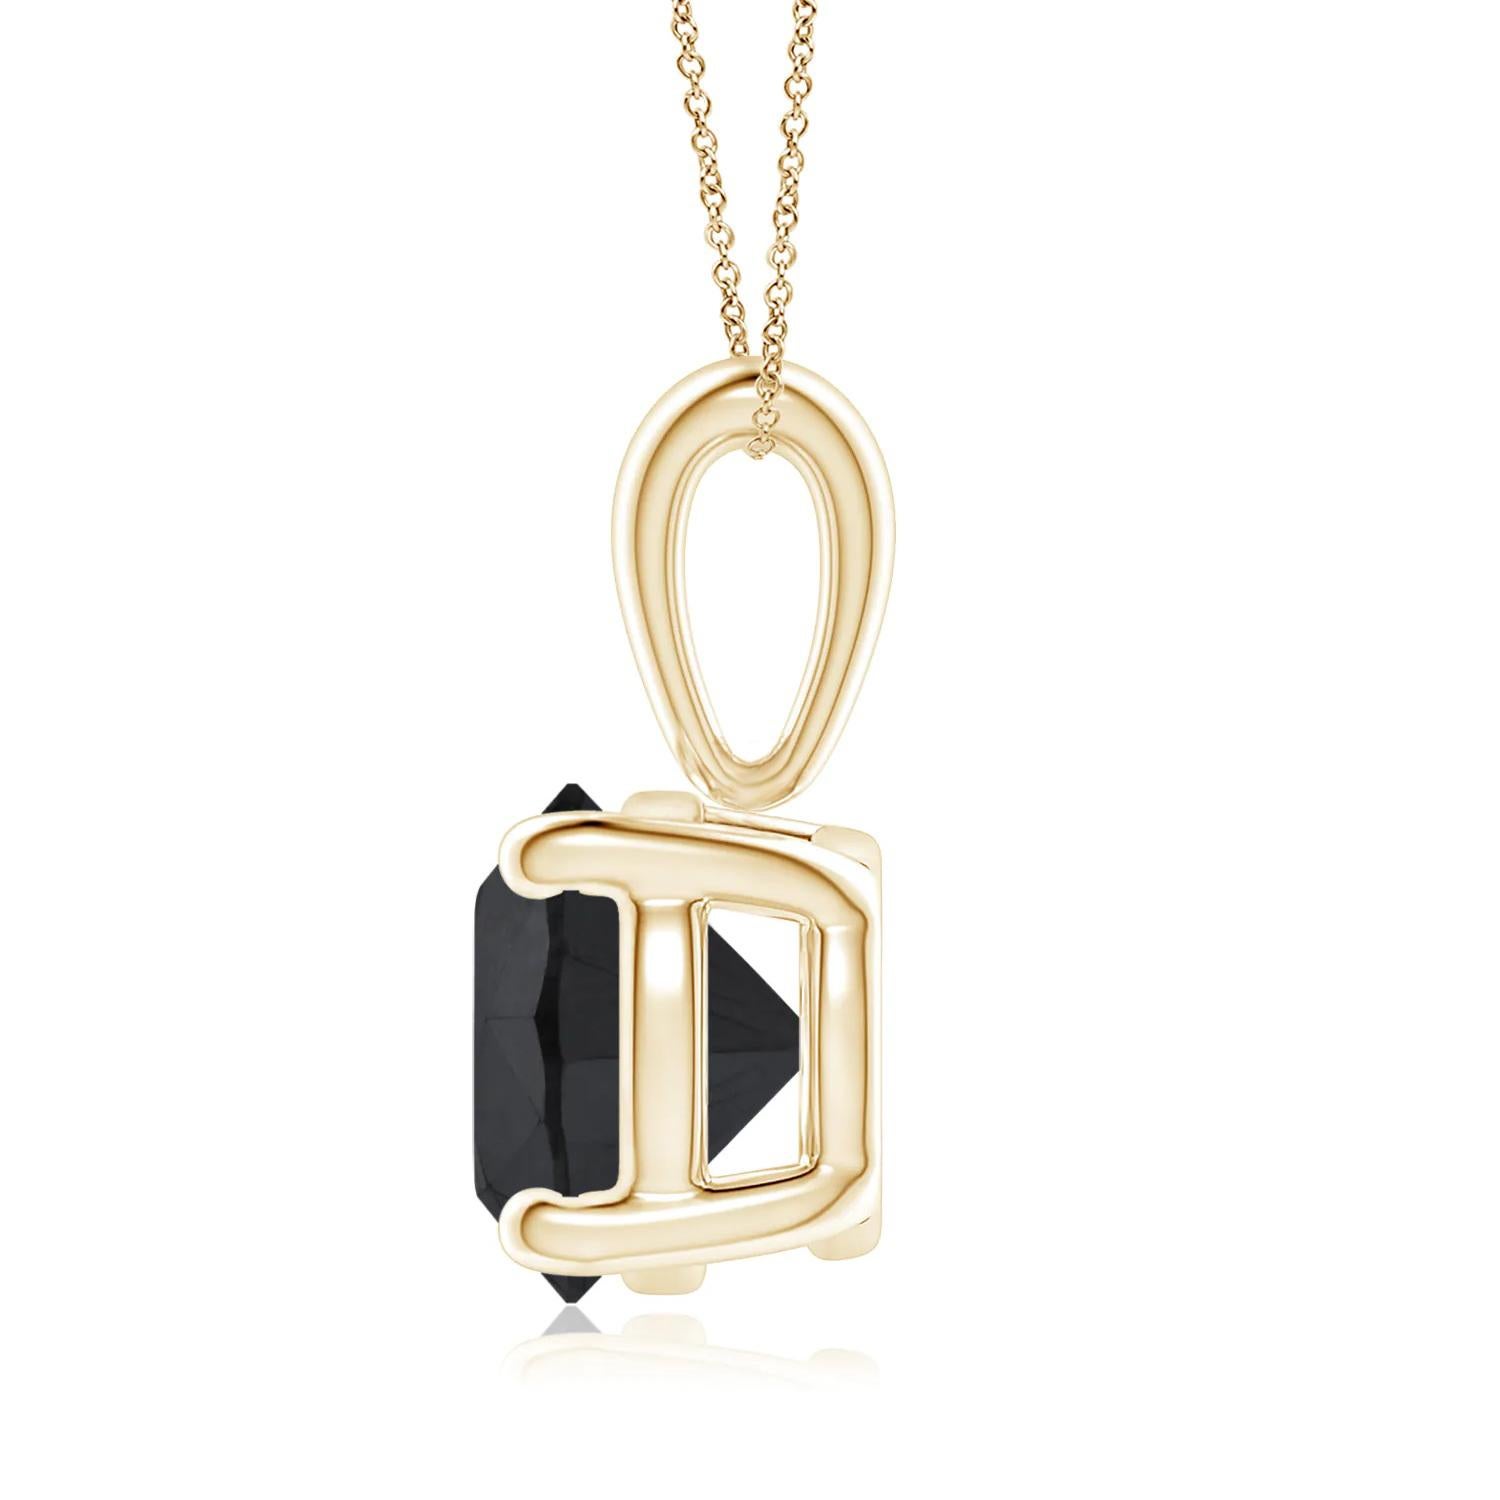 Surprise a special woman in your life with this breathtaking, statement hand crafted solitaire black diamond necklace. This eye-catching pendant necklace features a 1.35 carat round cut black diamond, measuring 6.71 x 6.75 x 4.37 mm set in 14k